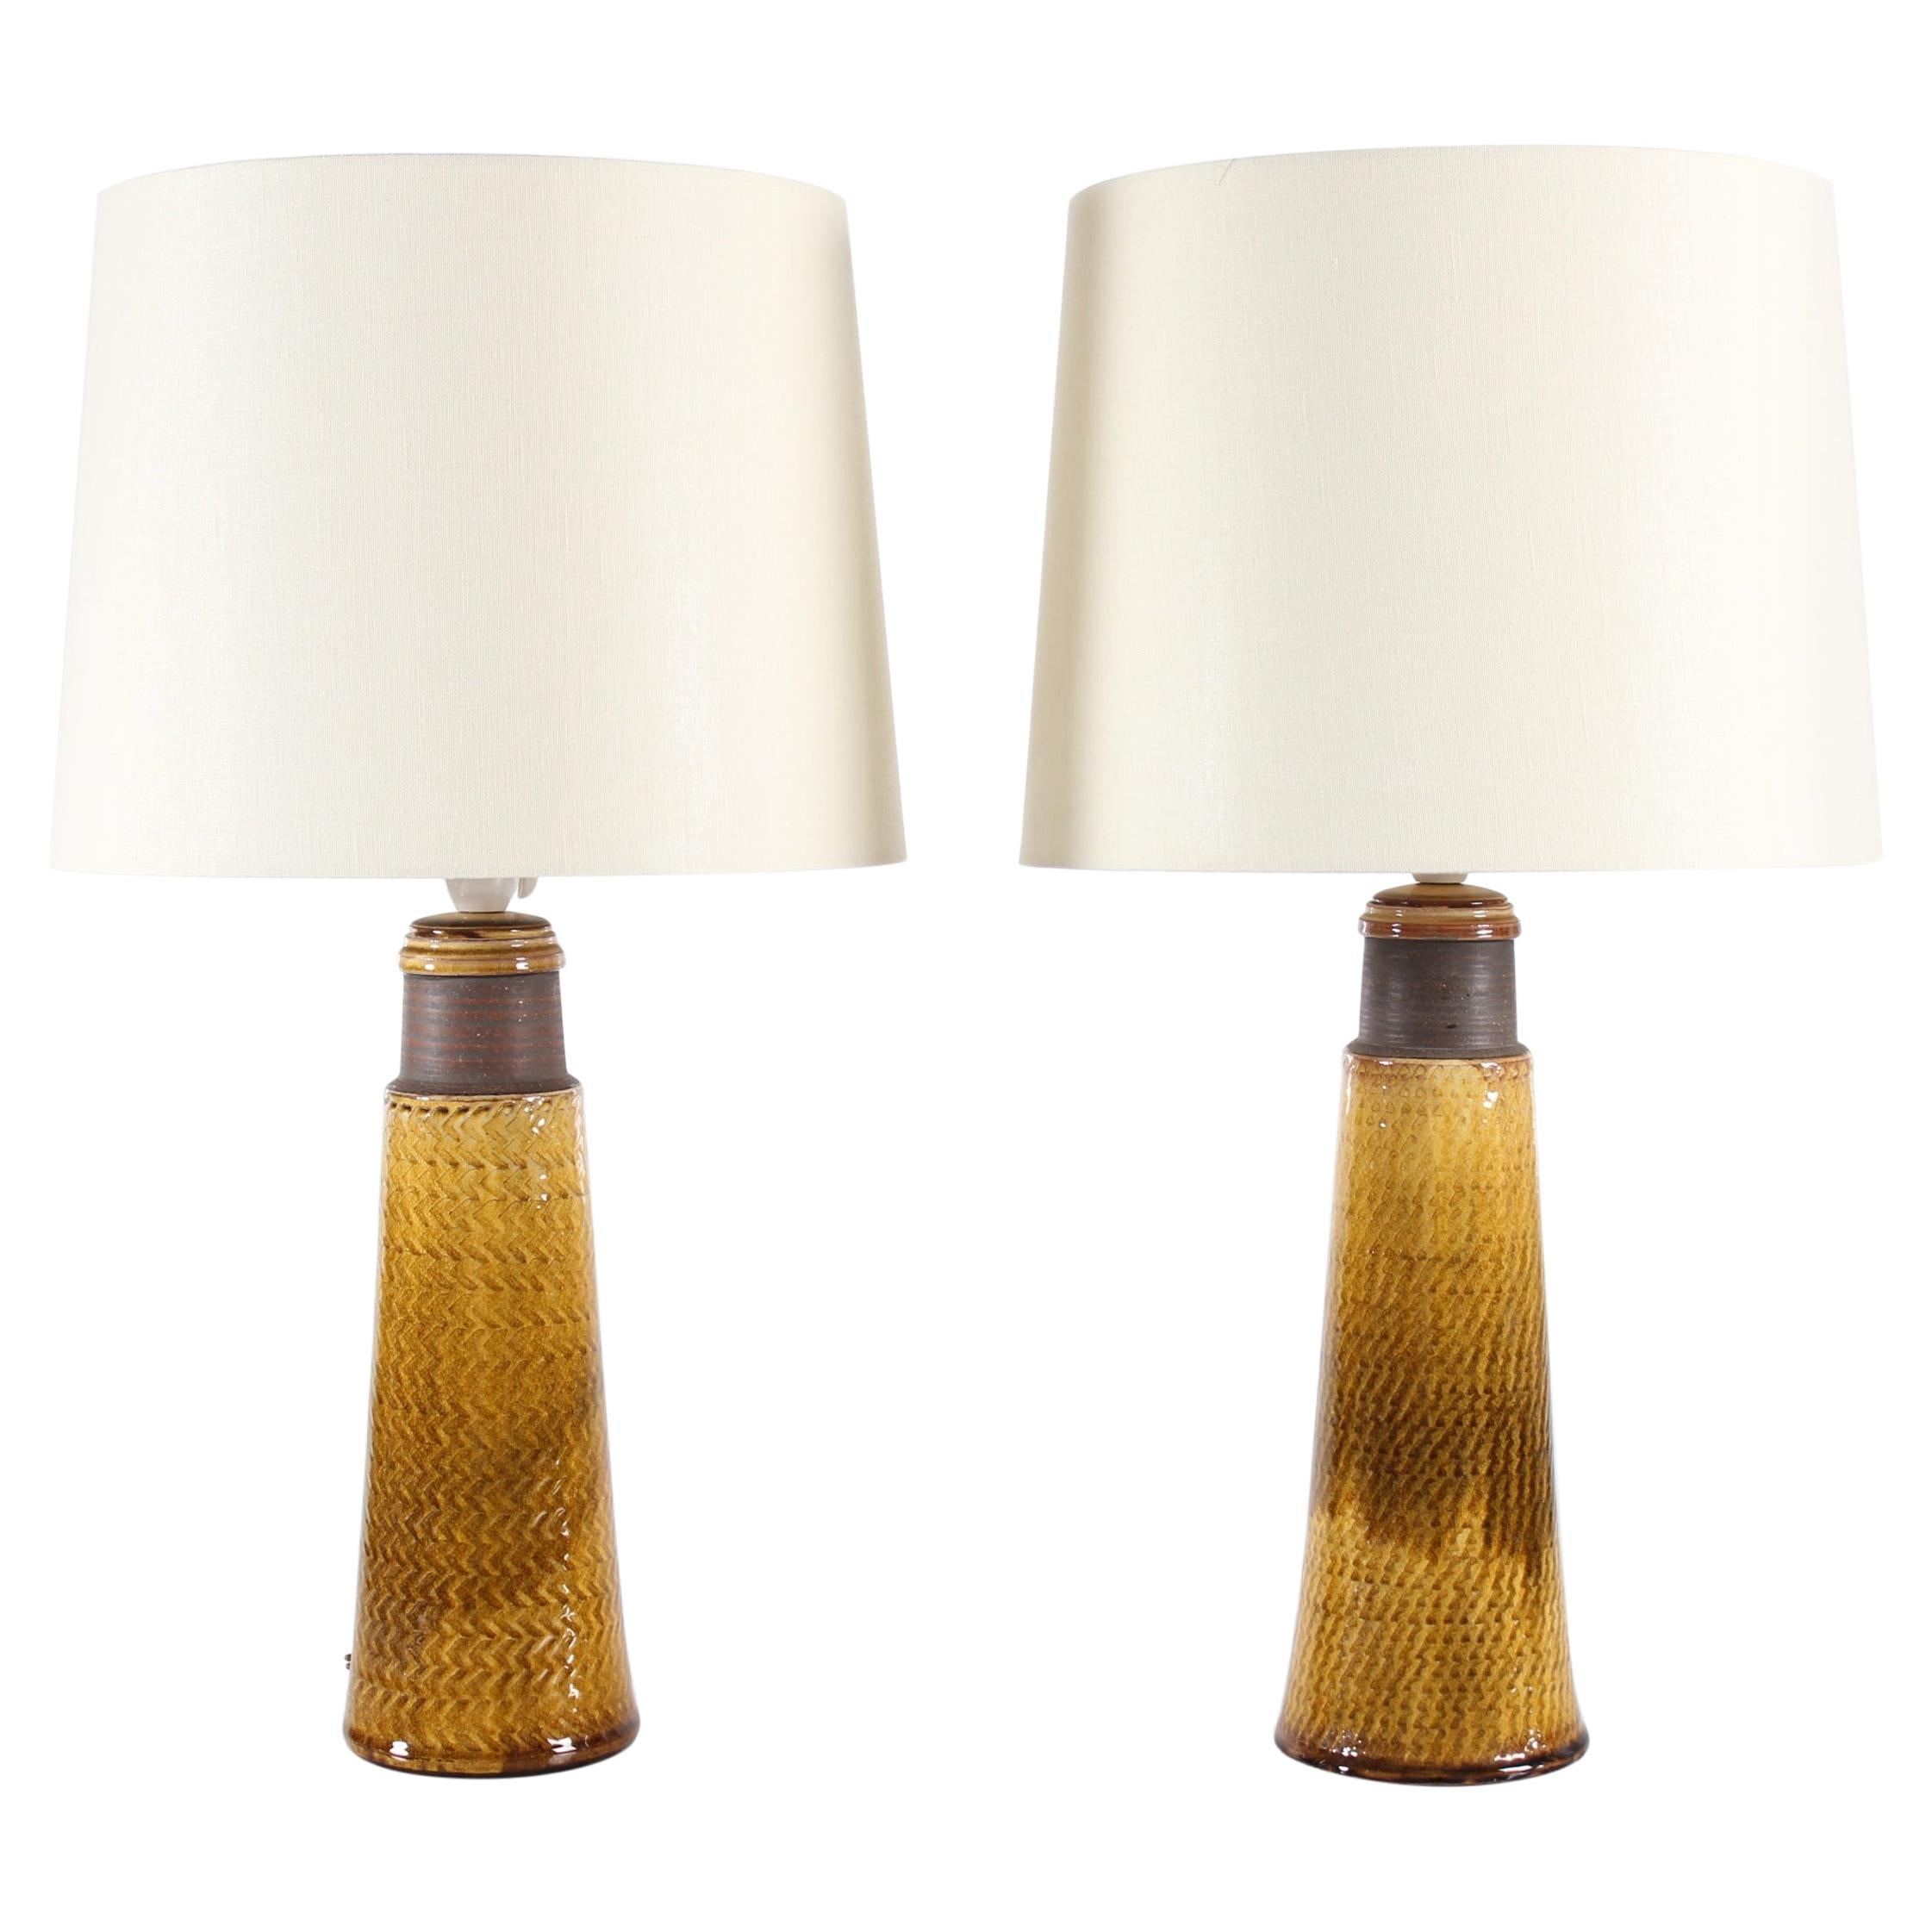 Pair of Kähler Ceramic Table Lamps with Amber-Colored Glaze Denmark Midcentury